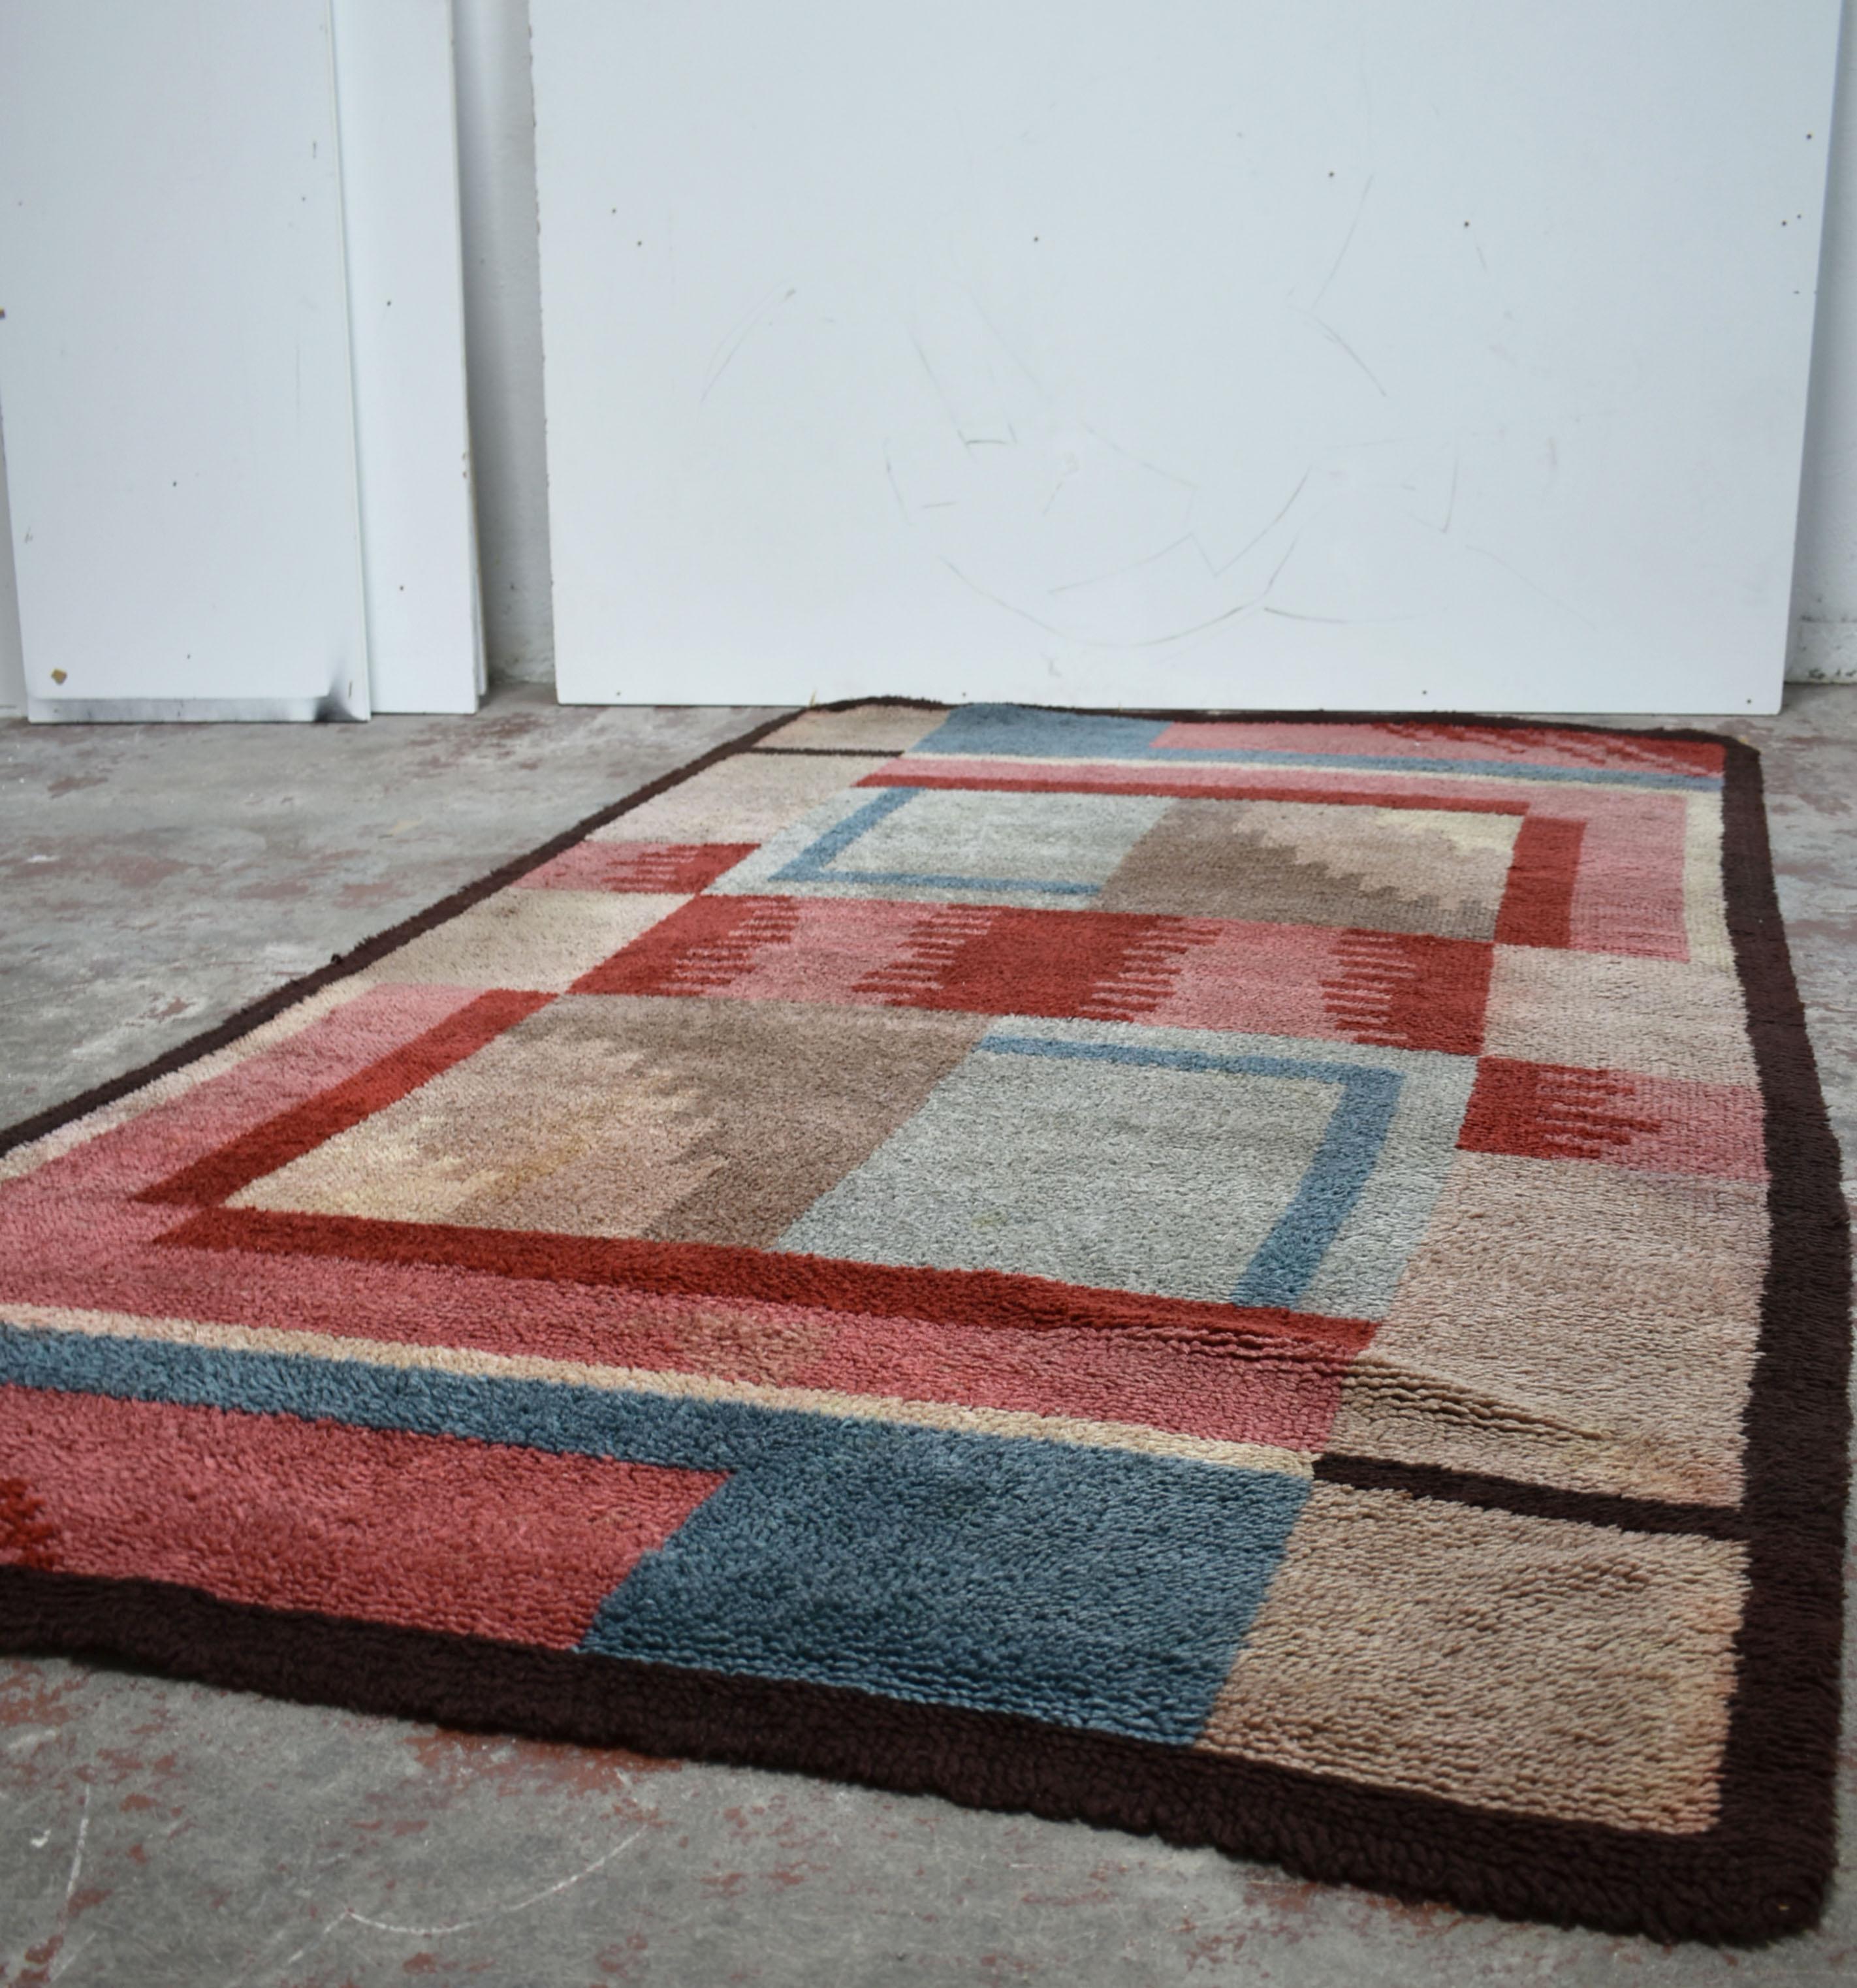 Stunning French Art Deco handwoven rug made of wool

Handcrafted in the 1930s this rug features a geometric design in De Stijl/Bauhaus style, with the colour palette consisting of shades of red, blue and tan colour framed with dark brown geometric